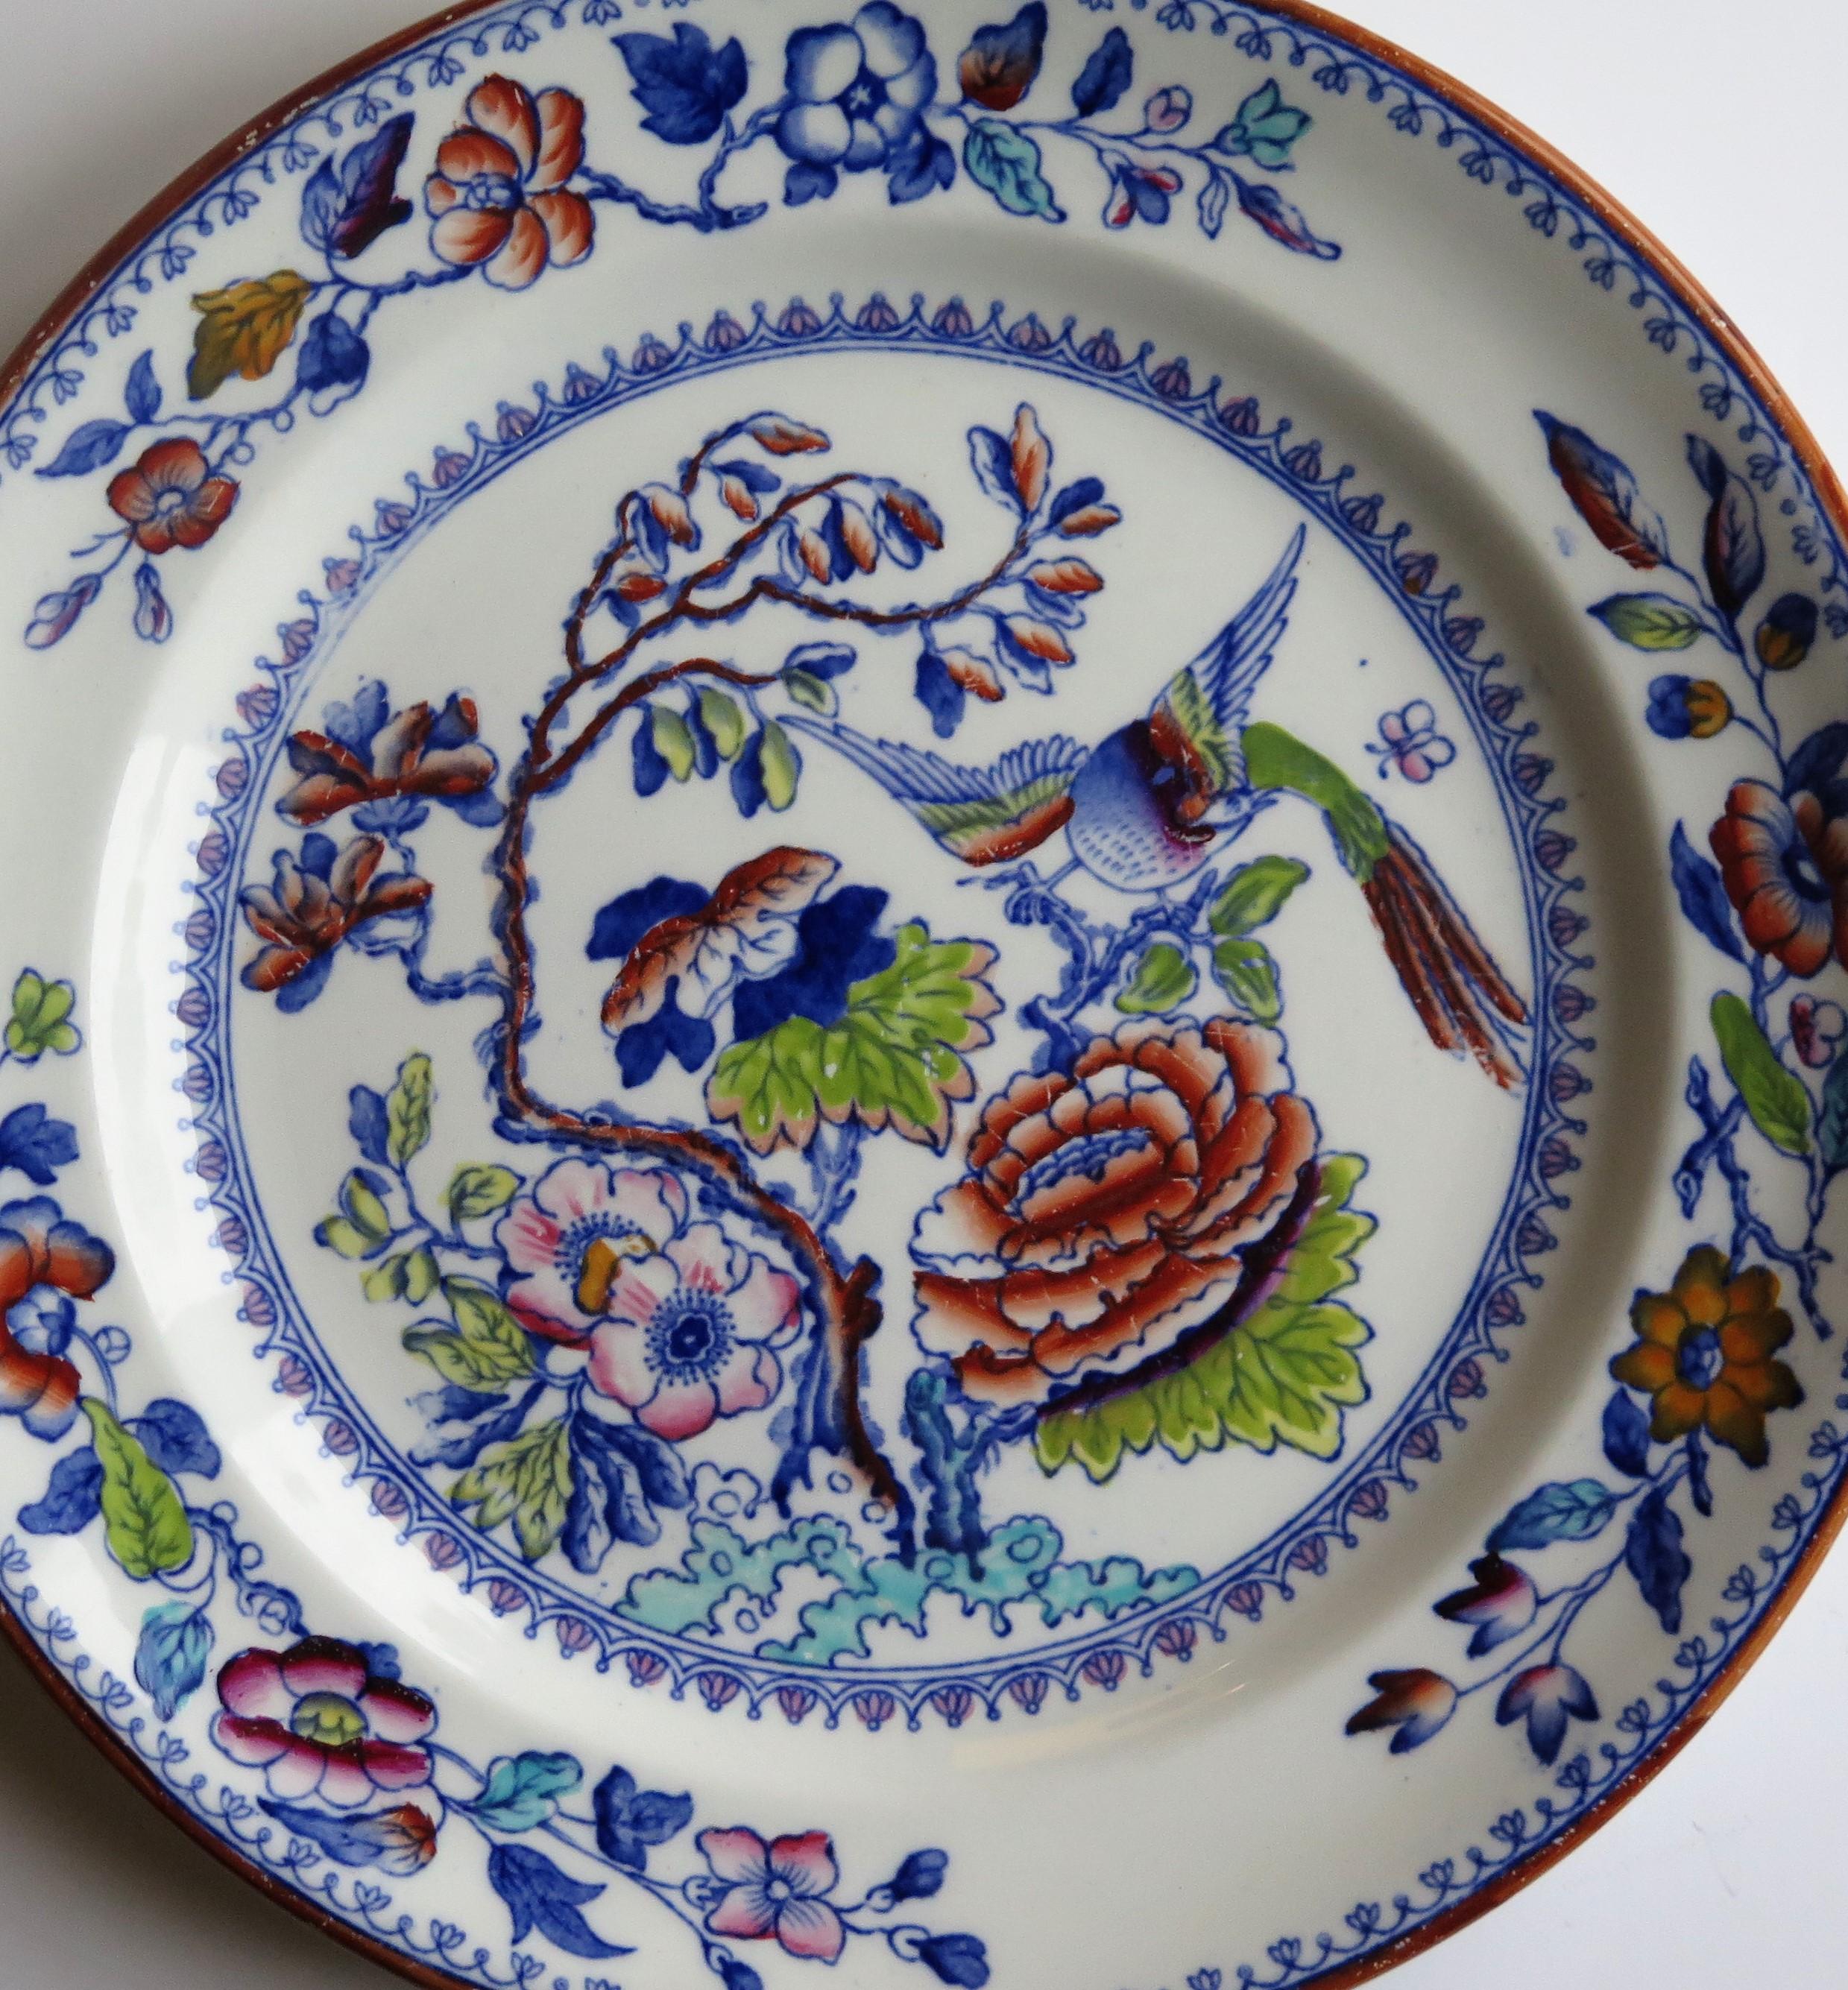 Mason's Ashworth's Ironstone Large Dinner Plate in Flying Bird Pattern, Ca 1900 For Sale 2